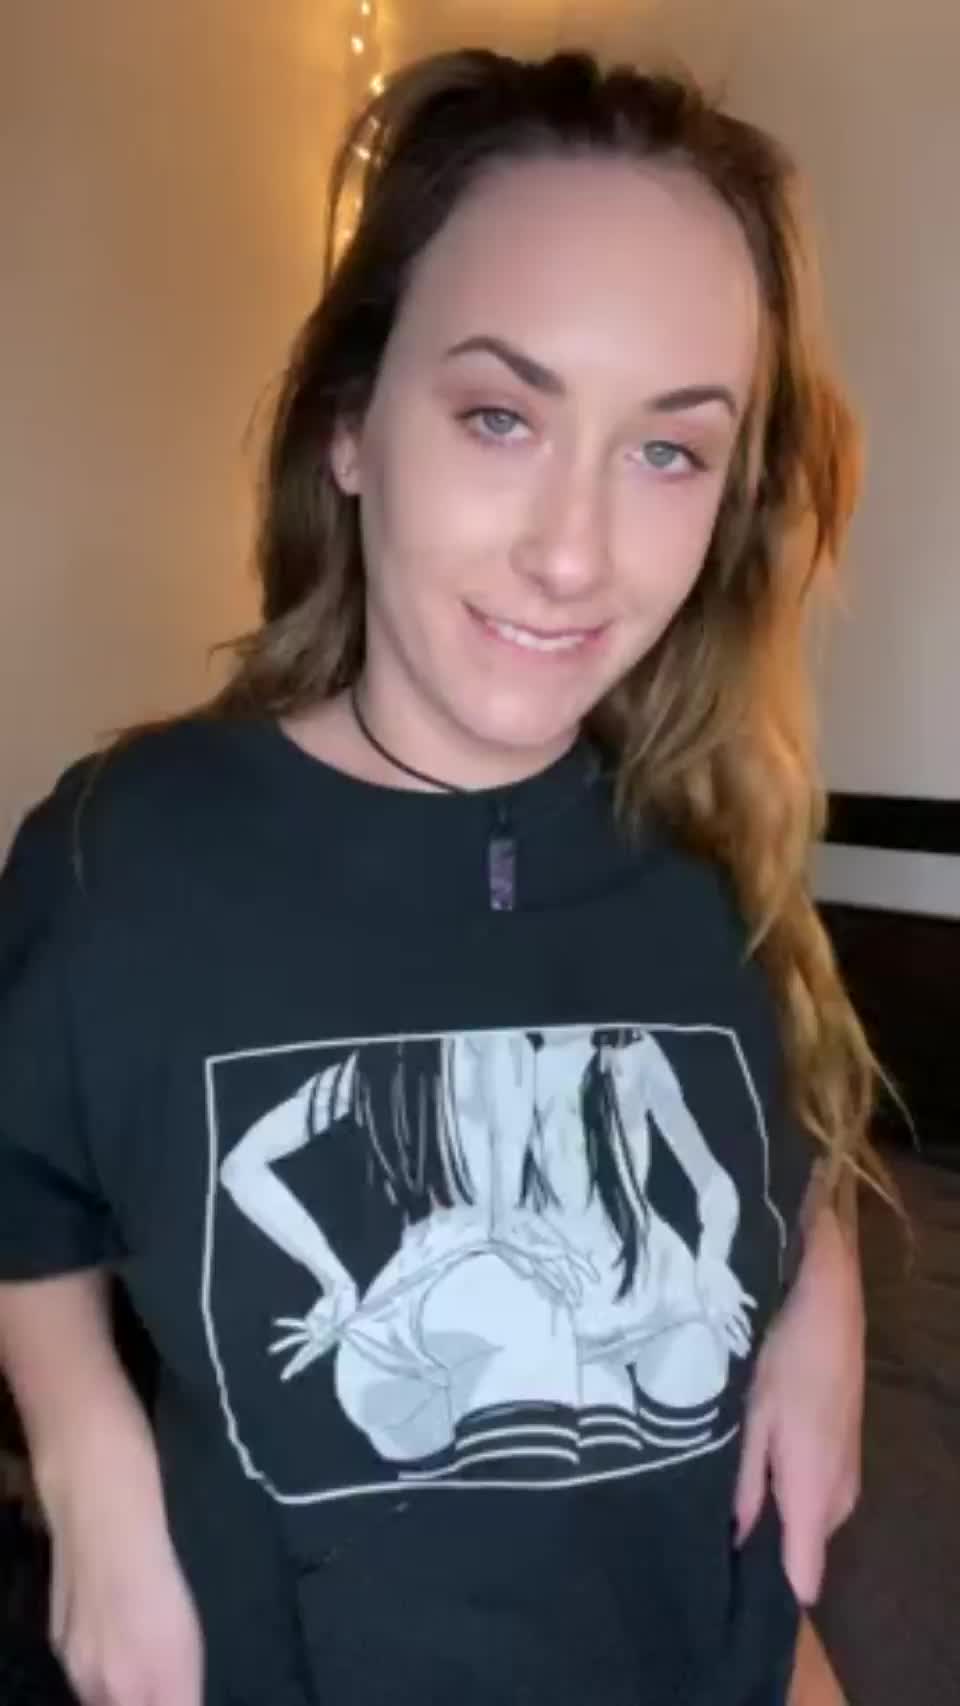 Long-haired slut with wonderful boobs smiling